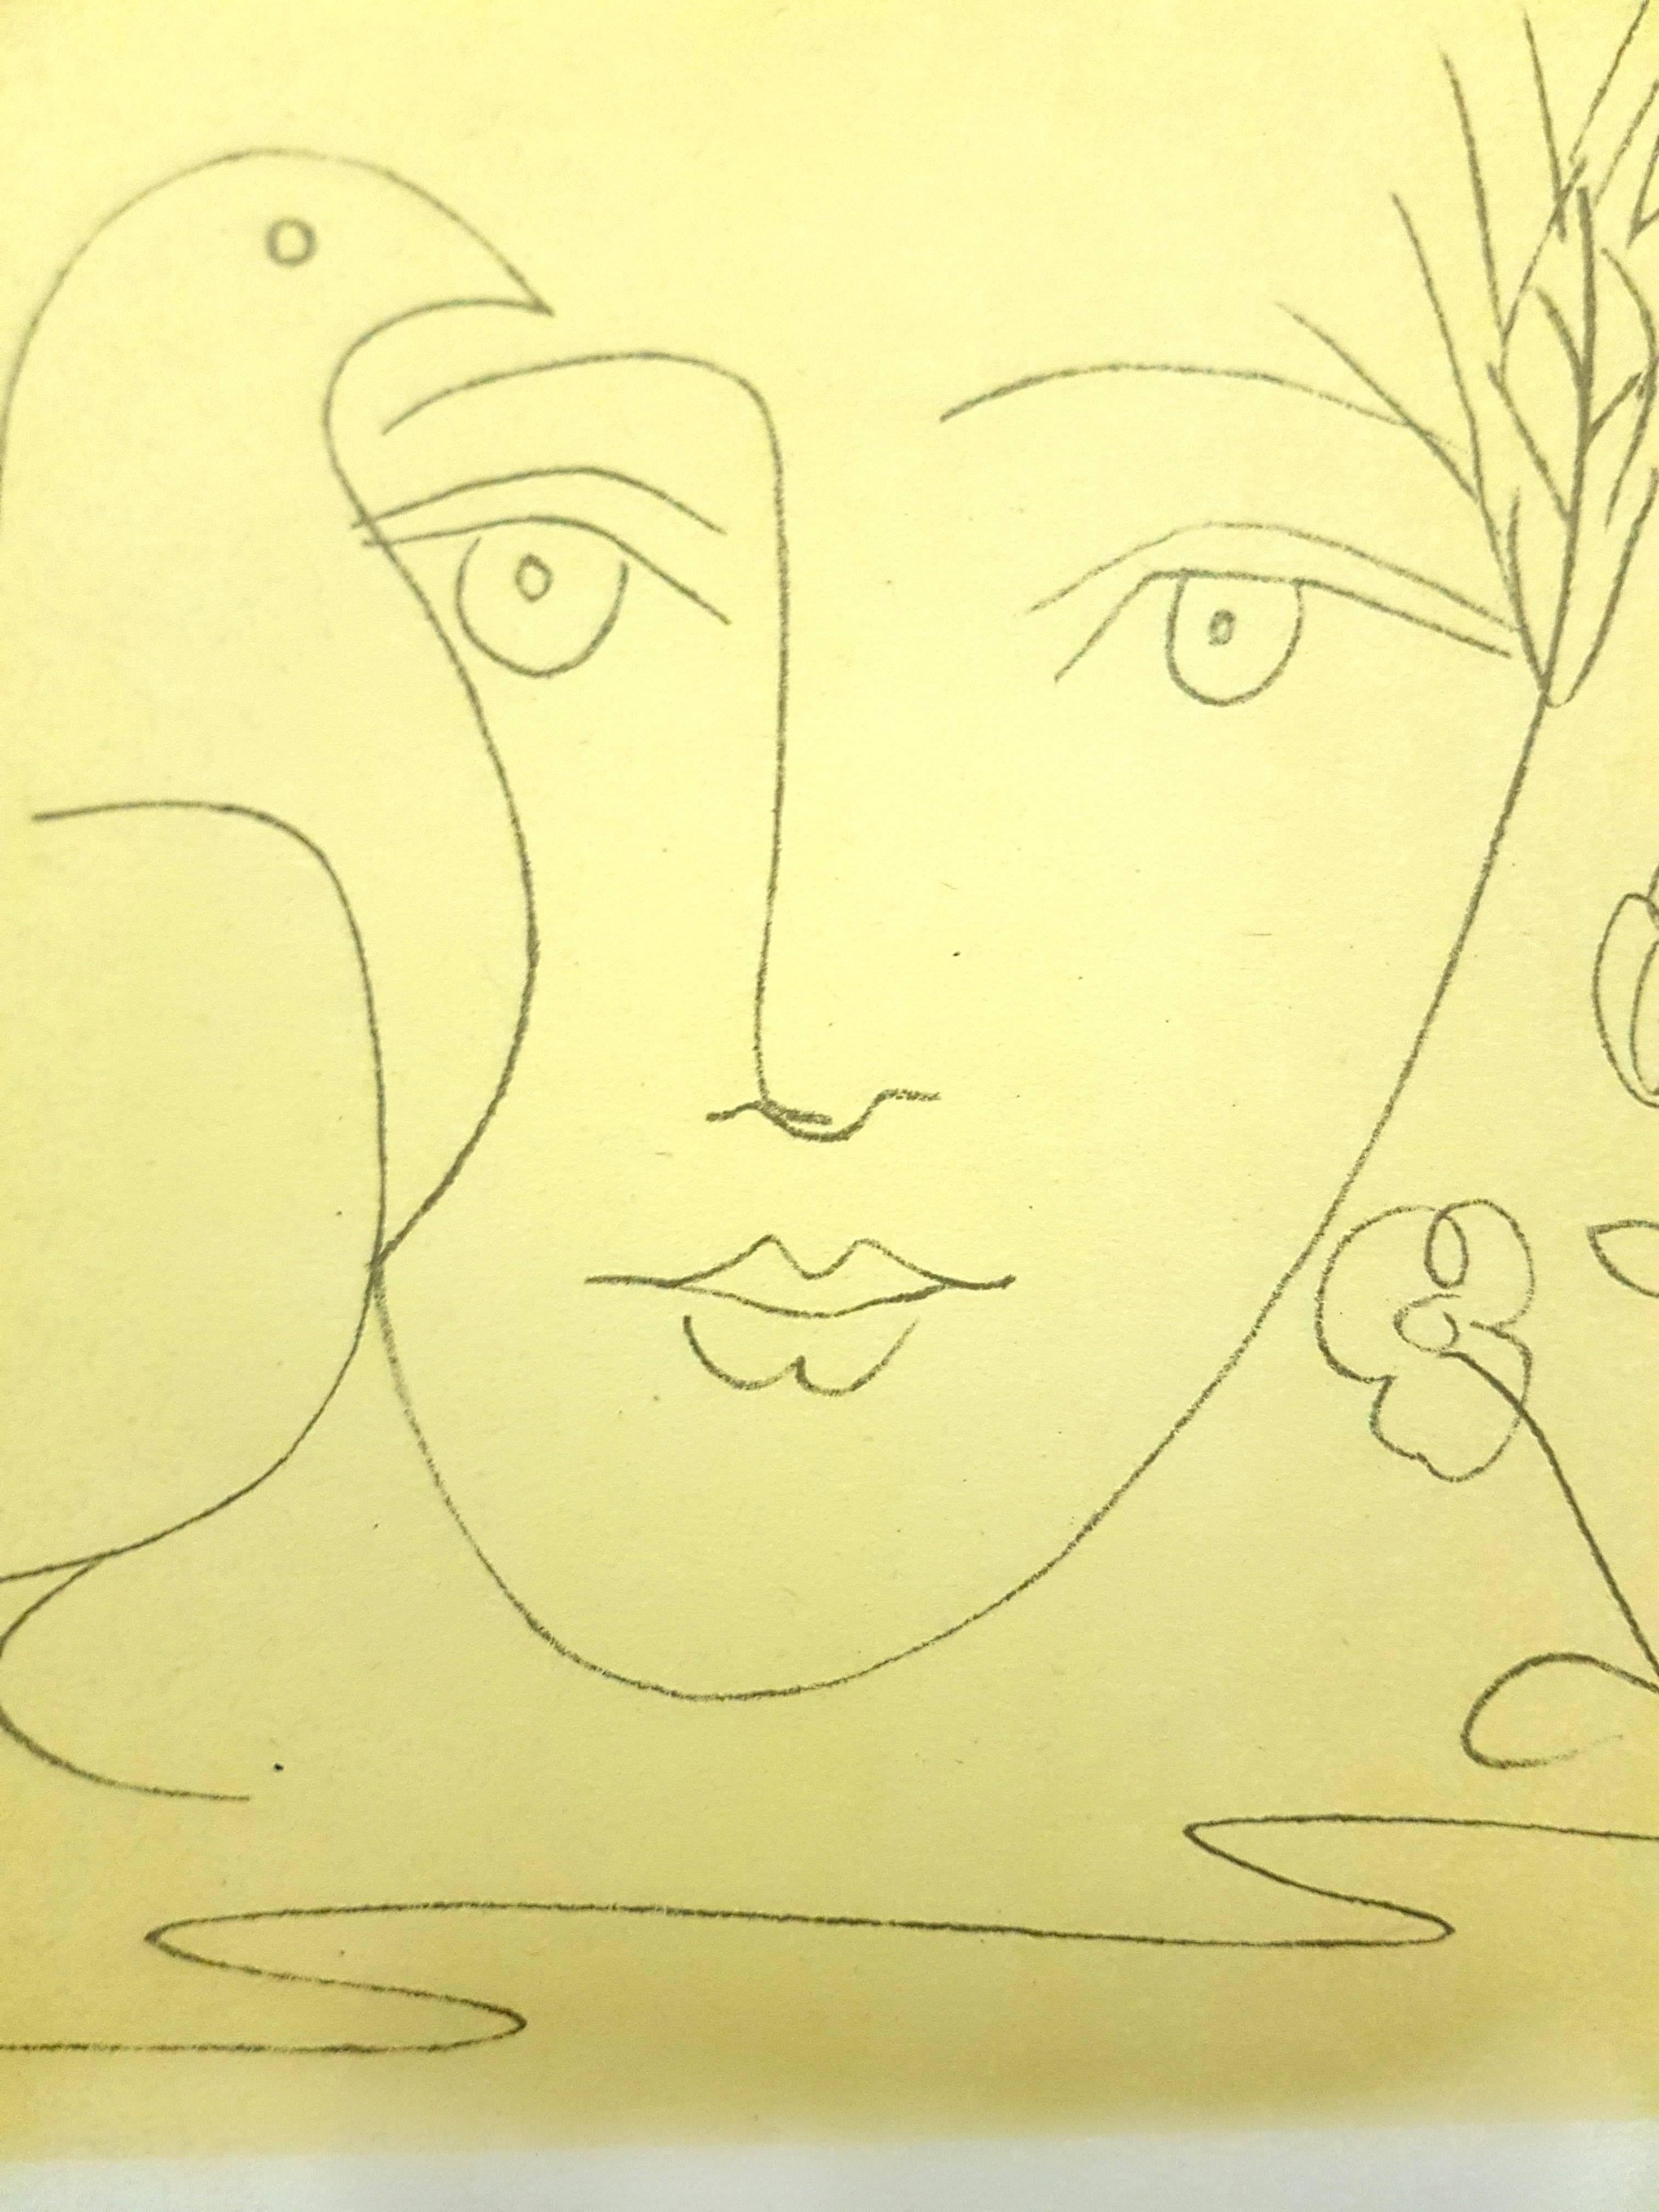 Face of Peace - Lithograph - Modern Print by (after) Pablo Picasso